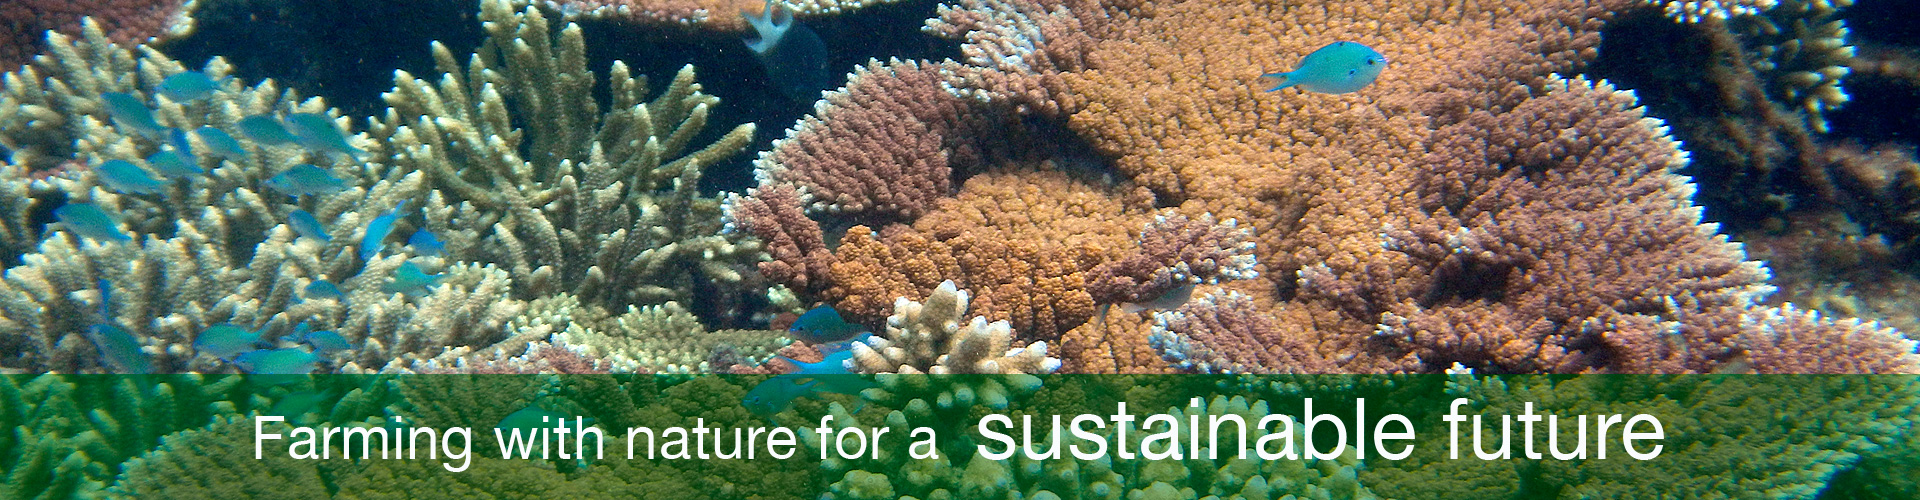 Our growing protocols help to protect the Great Barrier Reef